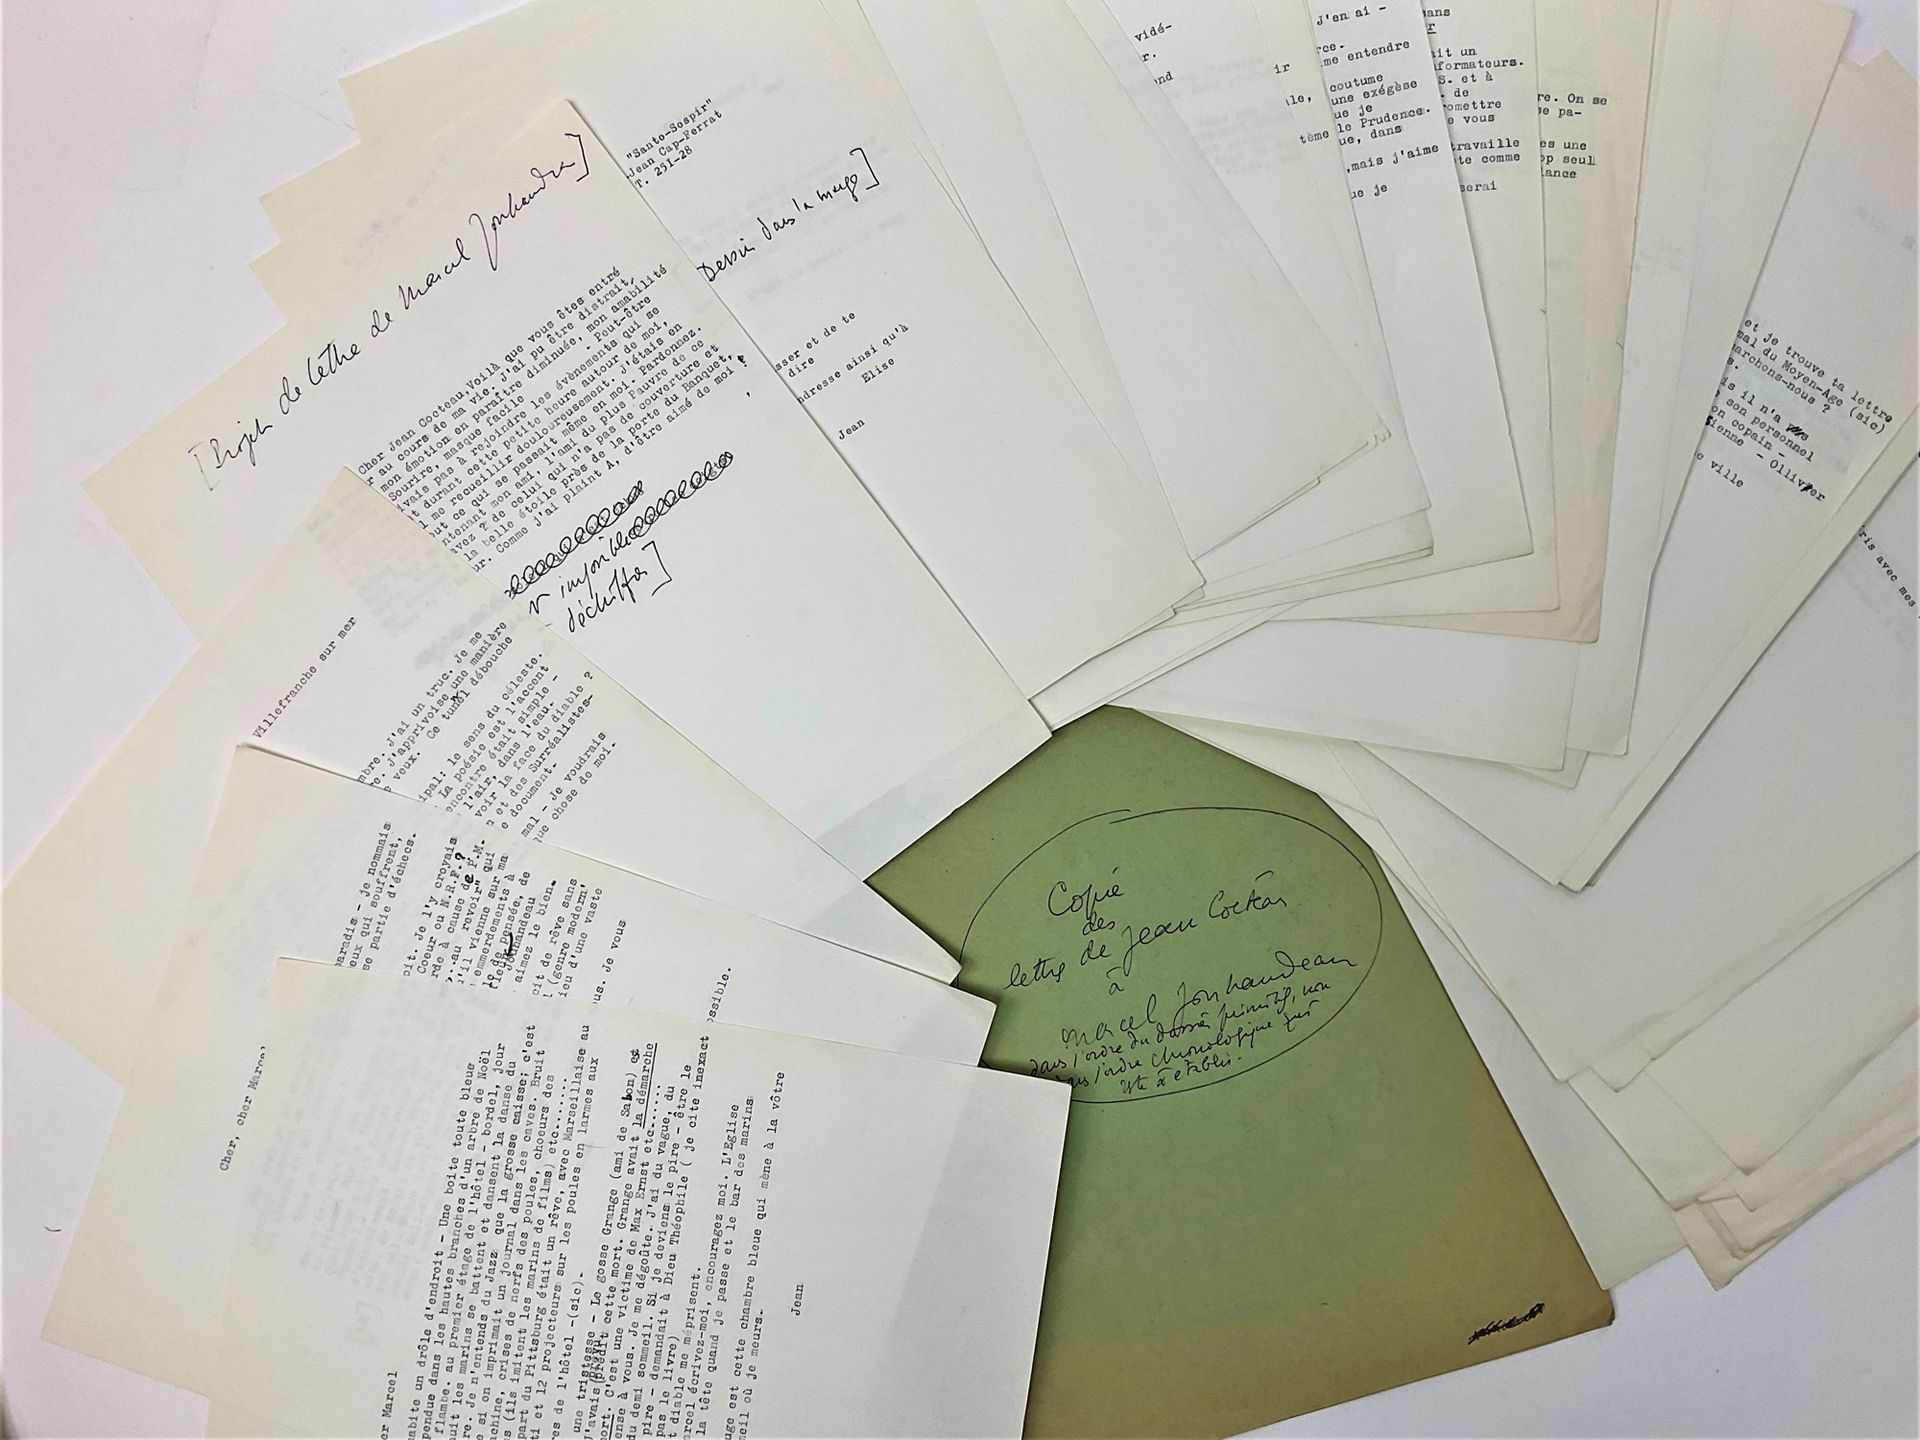 Null [Jean COCTEAU]: Set of typescripts of copies of 74 letters (in-4) to Marcel&hellip;